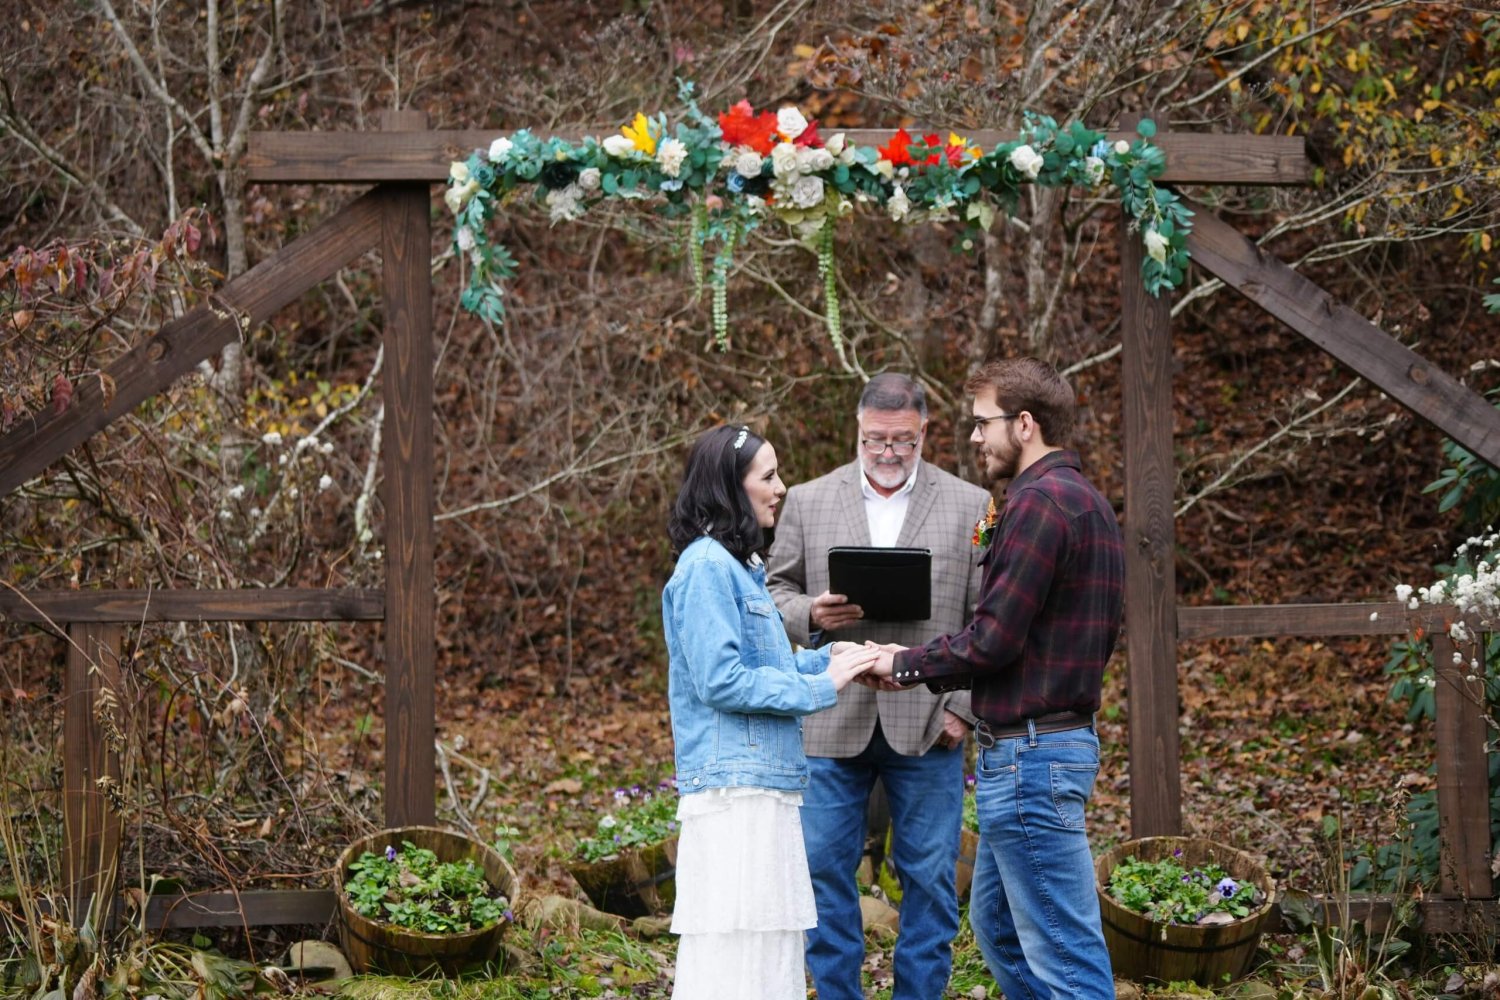 Simple wedding couple getting married in blue jeans and plaid at a wooden arbor with fall decor in the Smoky Mountains